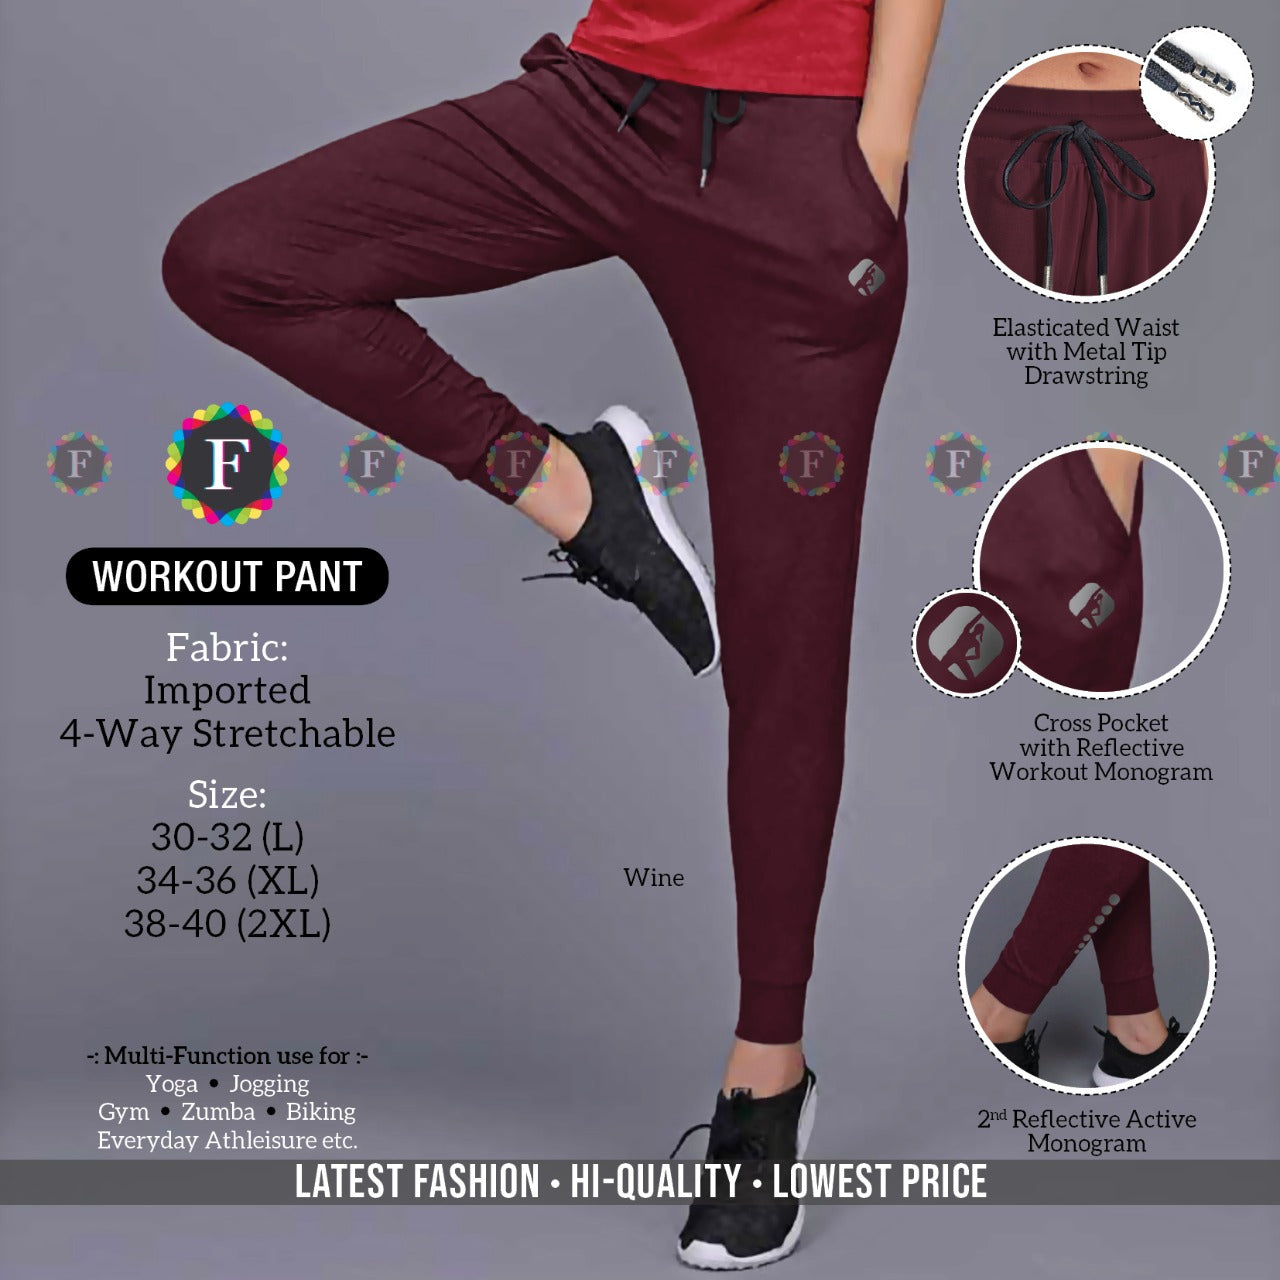 WORKOUT 4-Way Stretchable PANT